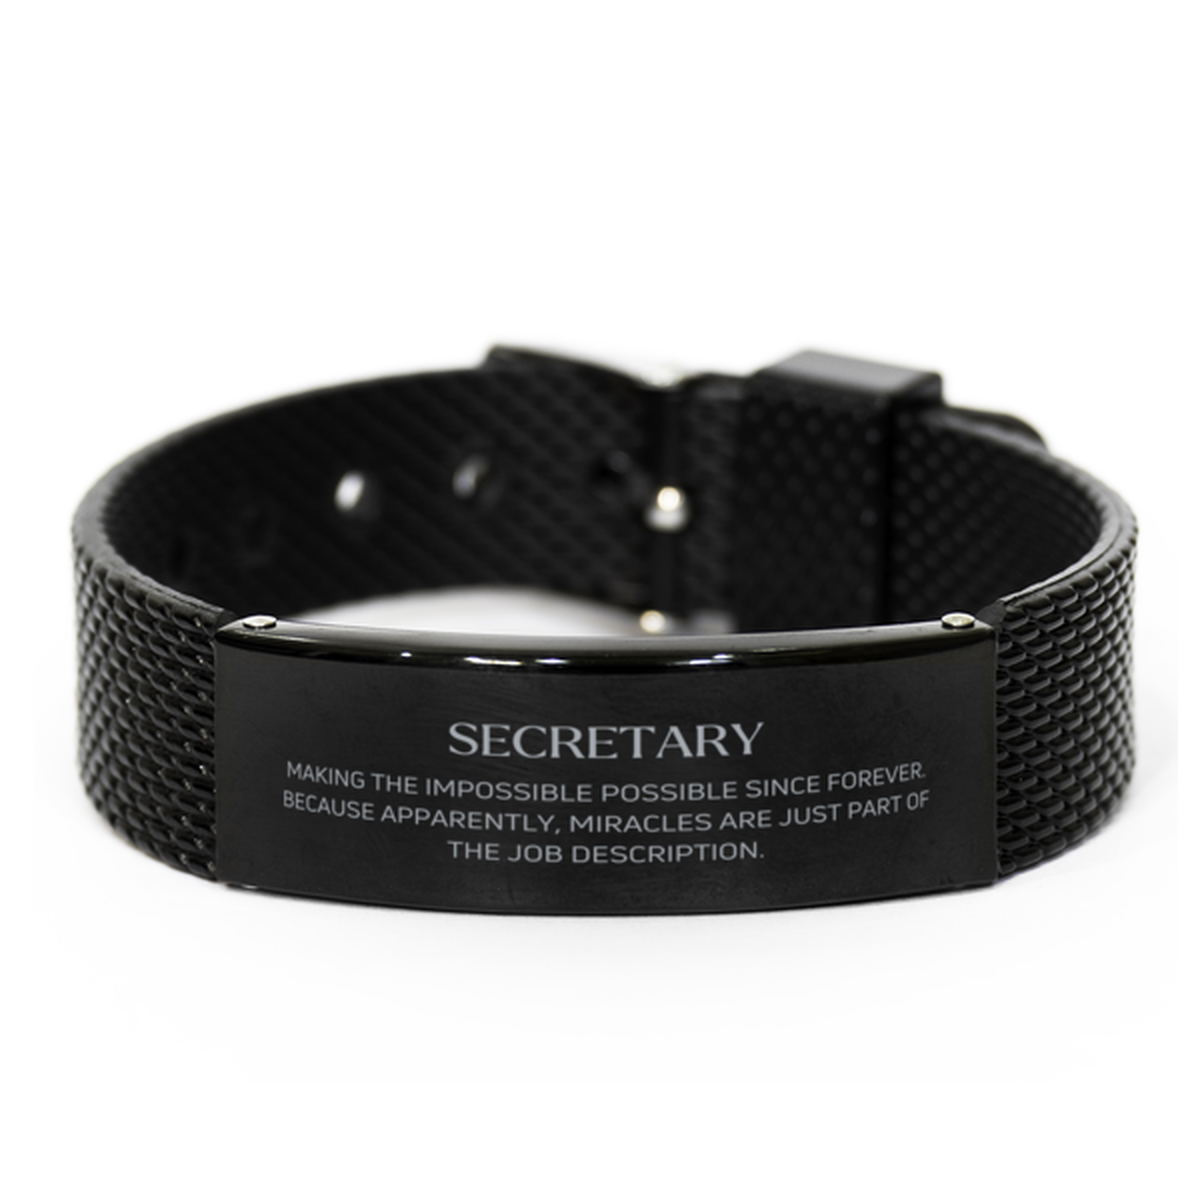 Funny Secretary Gifts, Miracles are just part of the job description, Inspirational Birthday Black Shark Mesh Bracelet For Secretary, Men, Women, Coworkers, Friends, Boss